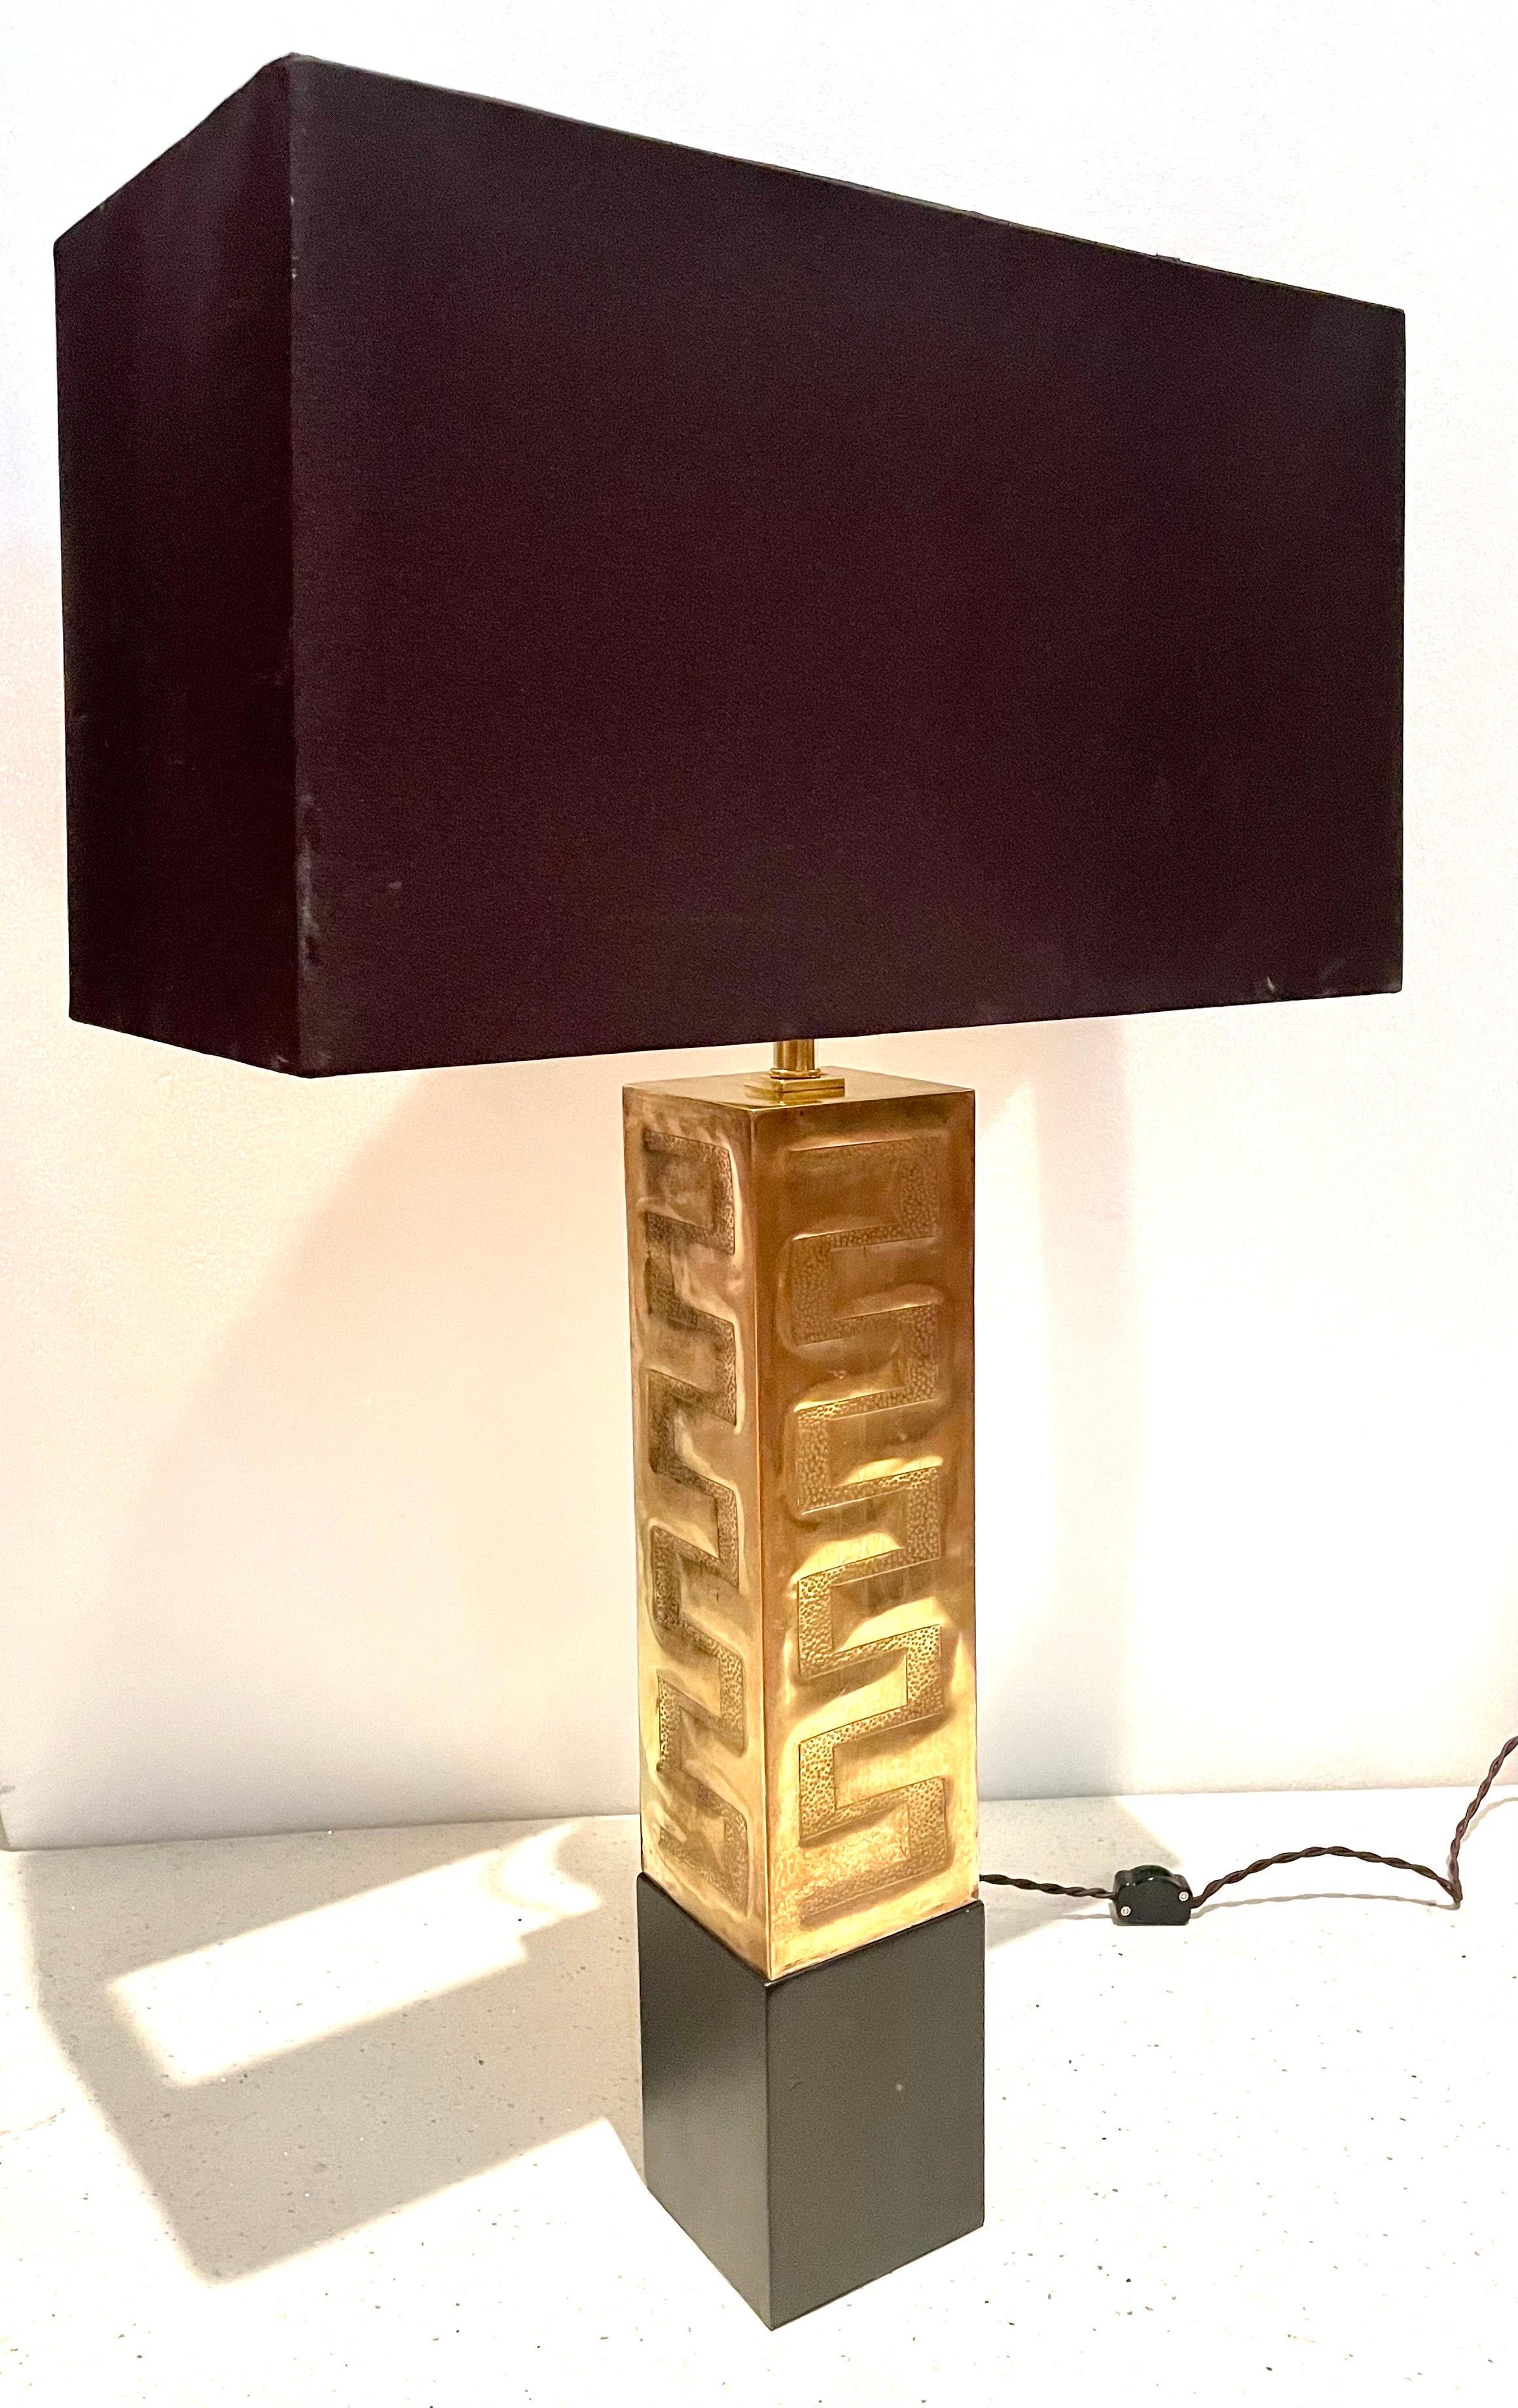 Hollywood Regency Rare Brass & Wood Base Table Desk Lamp In Excellent Condition For Sale In San Diego, CA